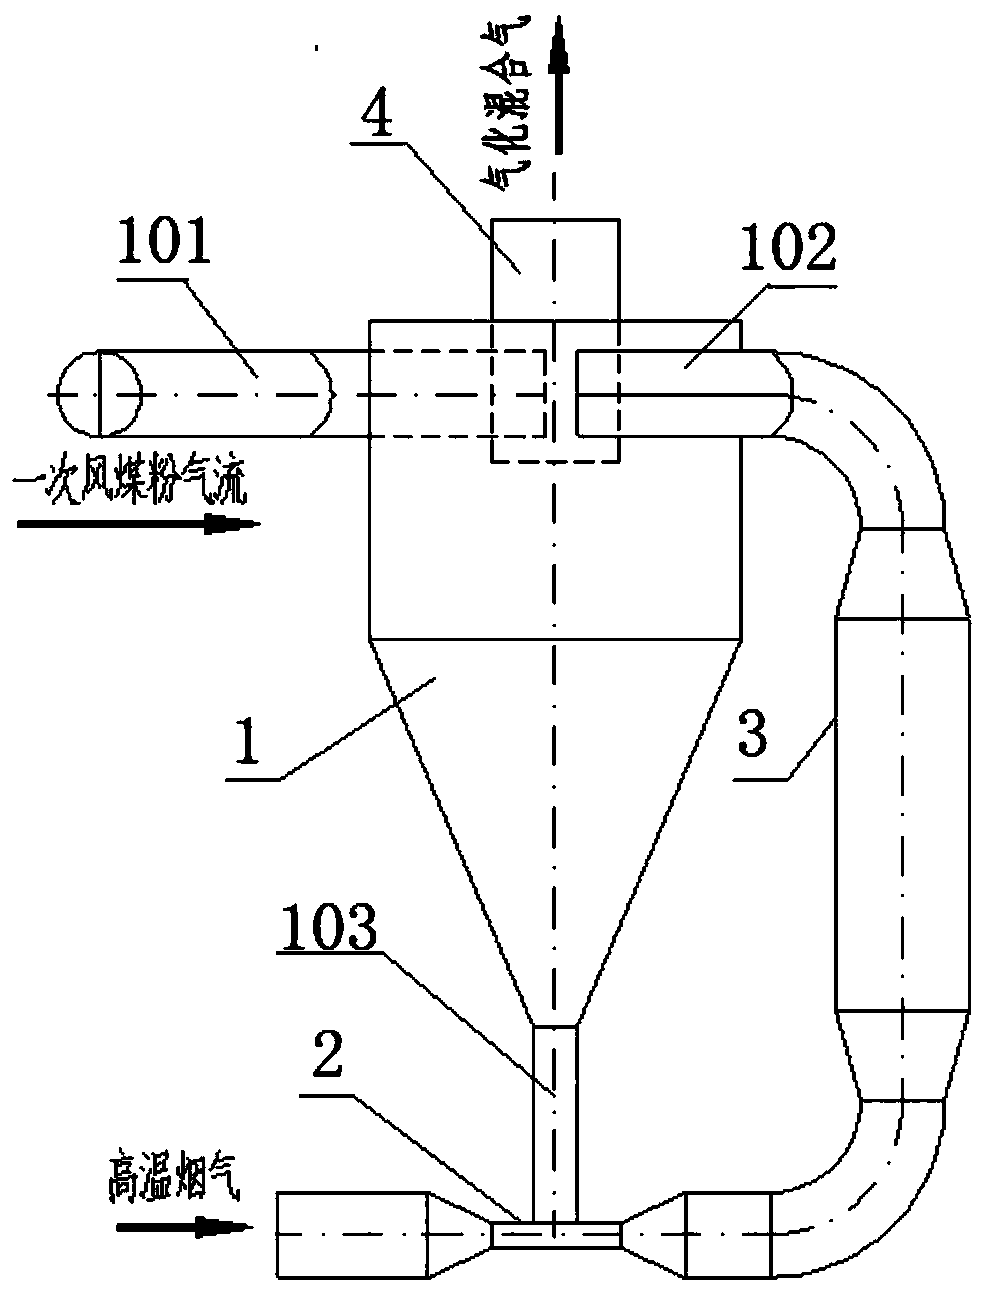 Boiler primary air pulverized coal flow gasification device for boiler ignition and stable combustion